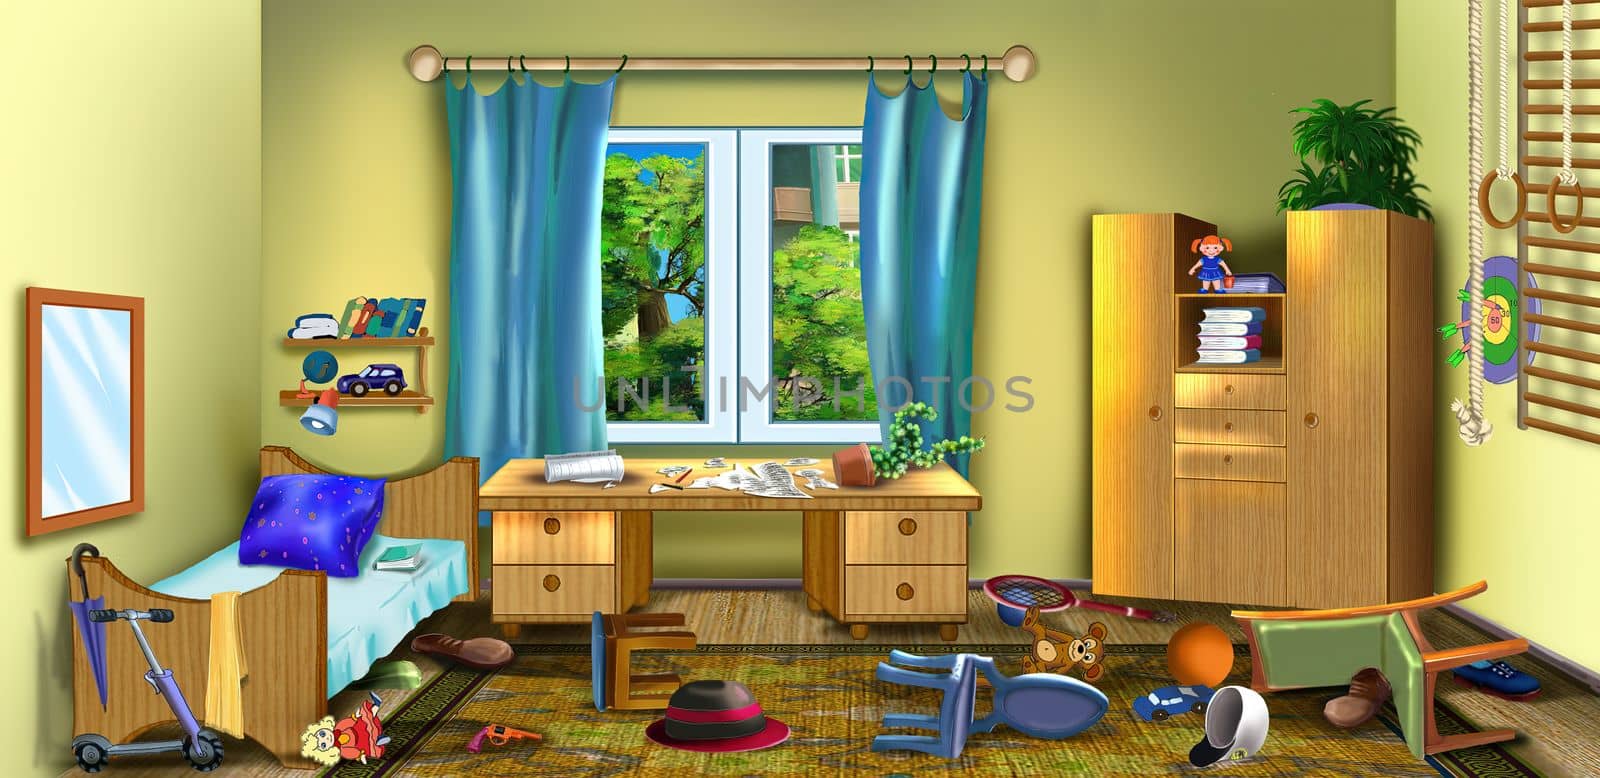 Mess in the kids room illustration by Multipedia